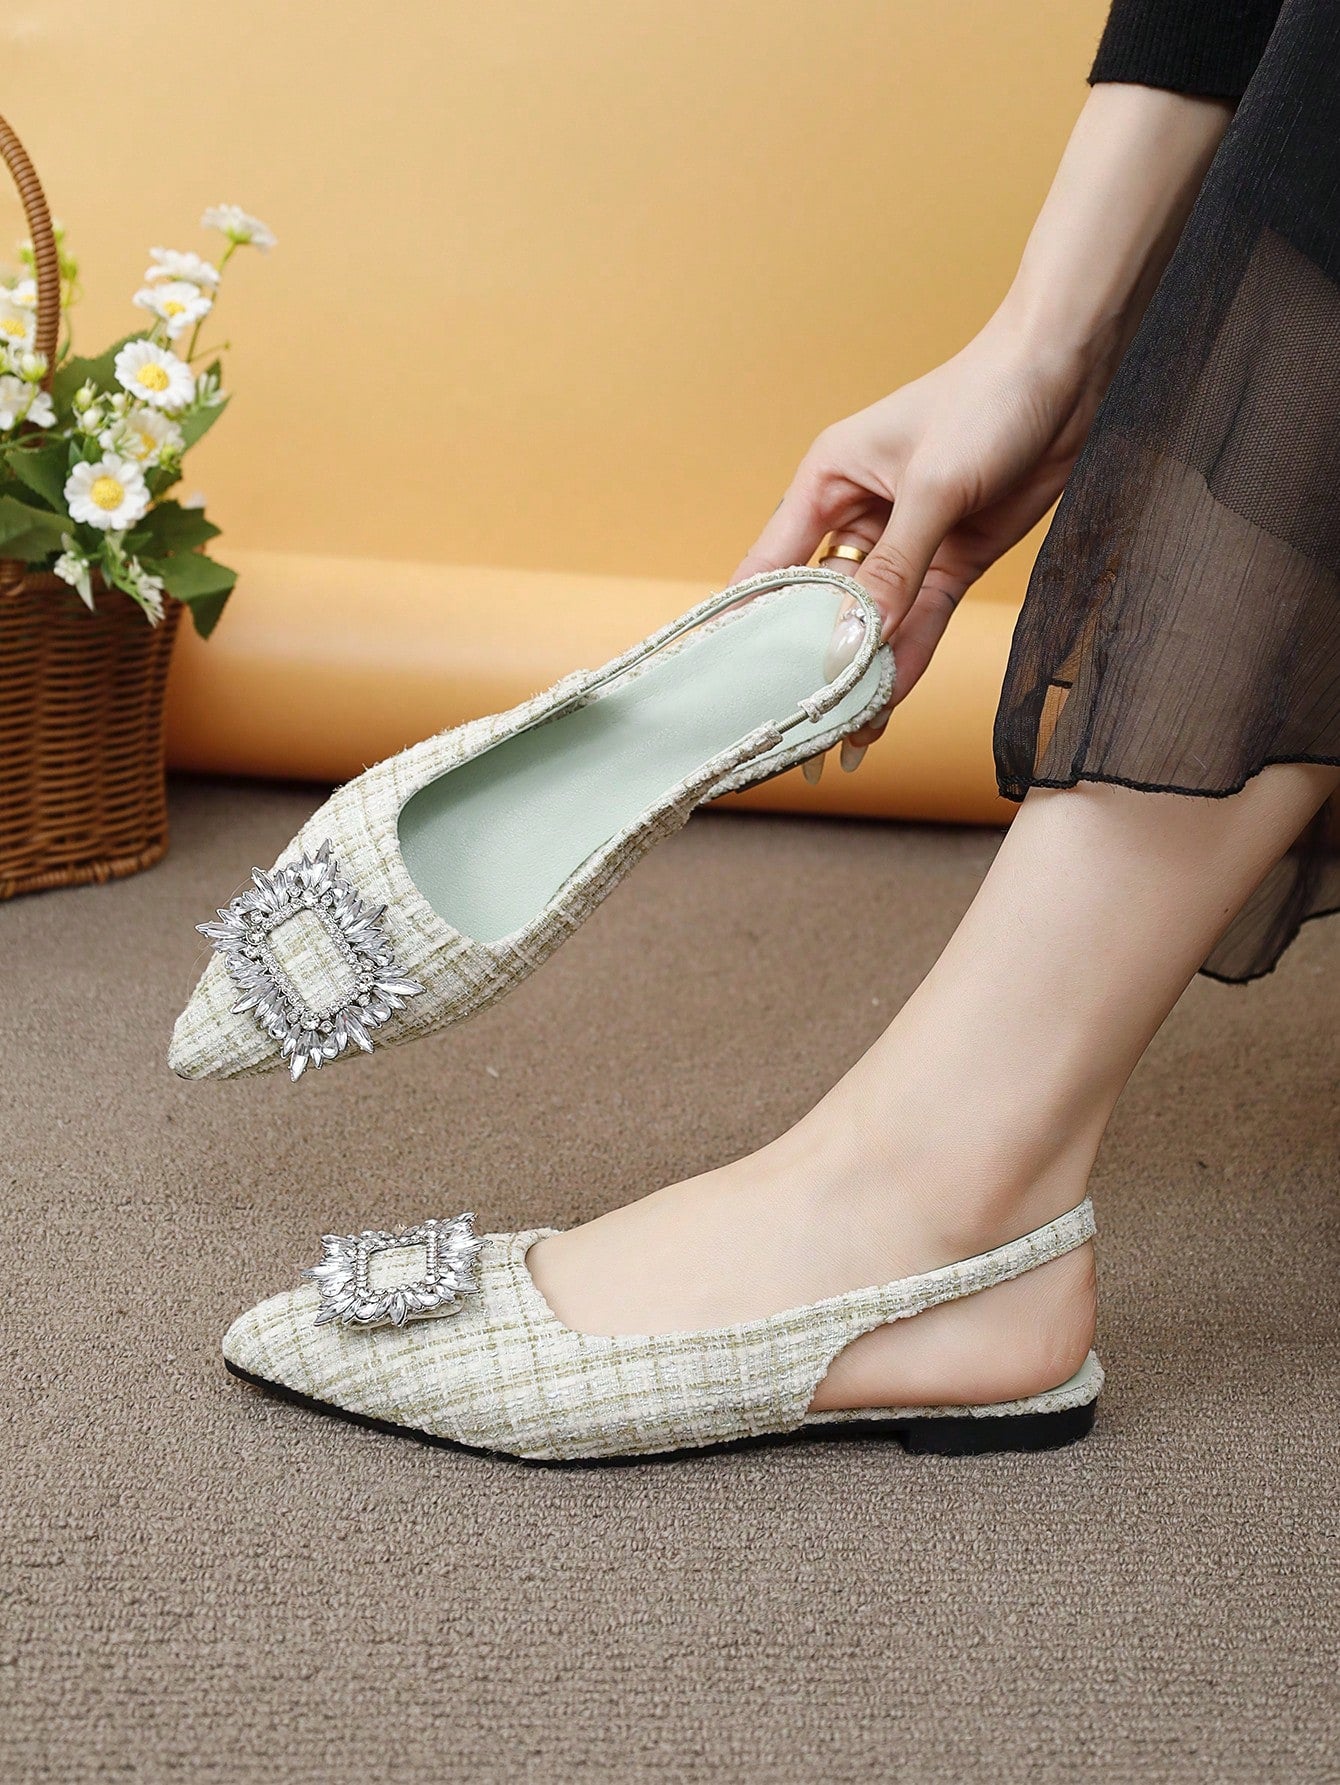 Factory Direct Sales Vintage Style Women's Shoes, Retro Green Style, Ladies' Sandals With Covered Toes, Spring And Summer, Featuring Classic French Romanticism, Pointed And Extremely Comfortable Low-Heel Slippers